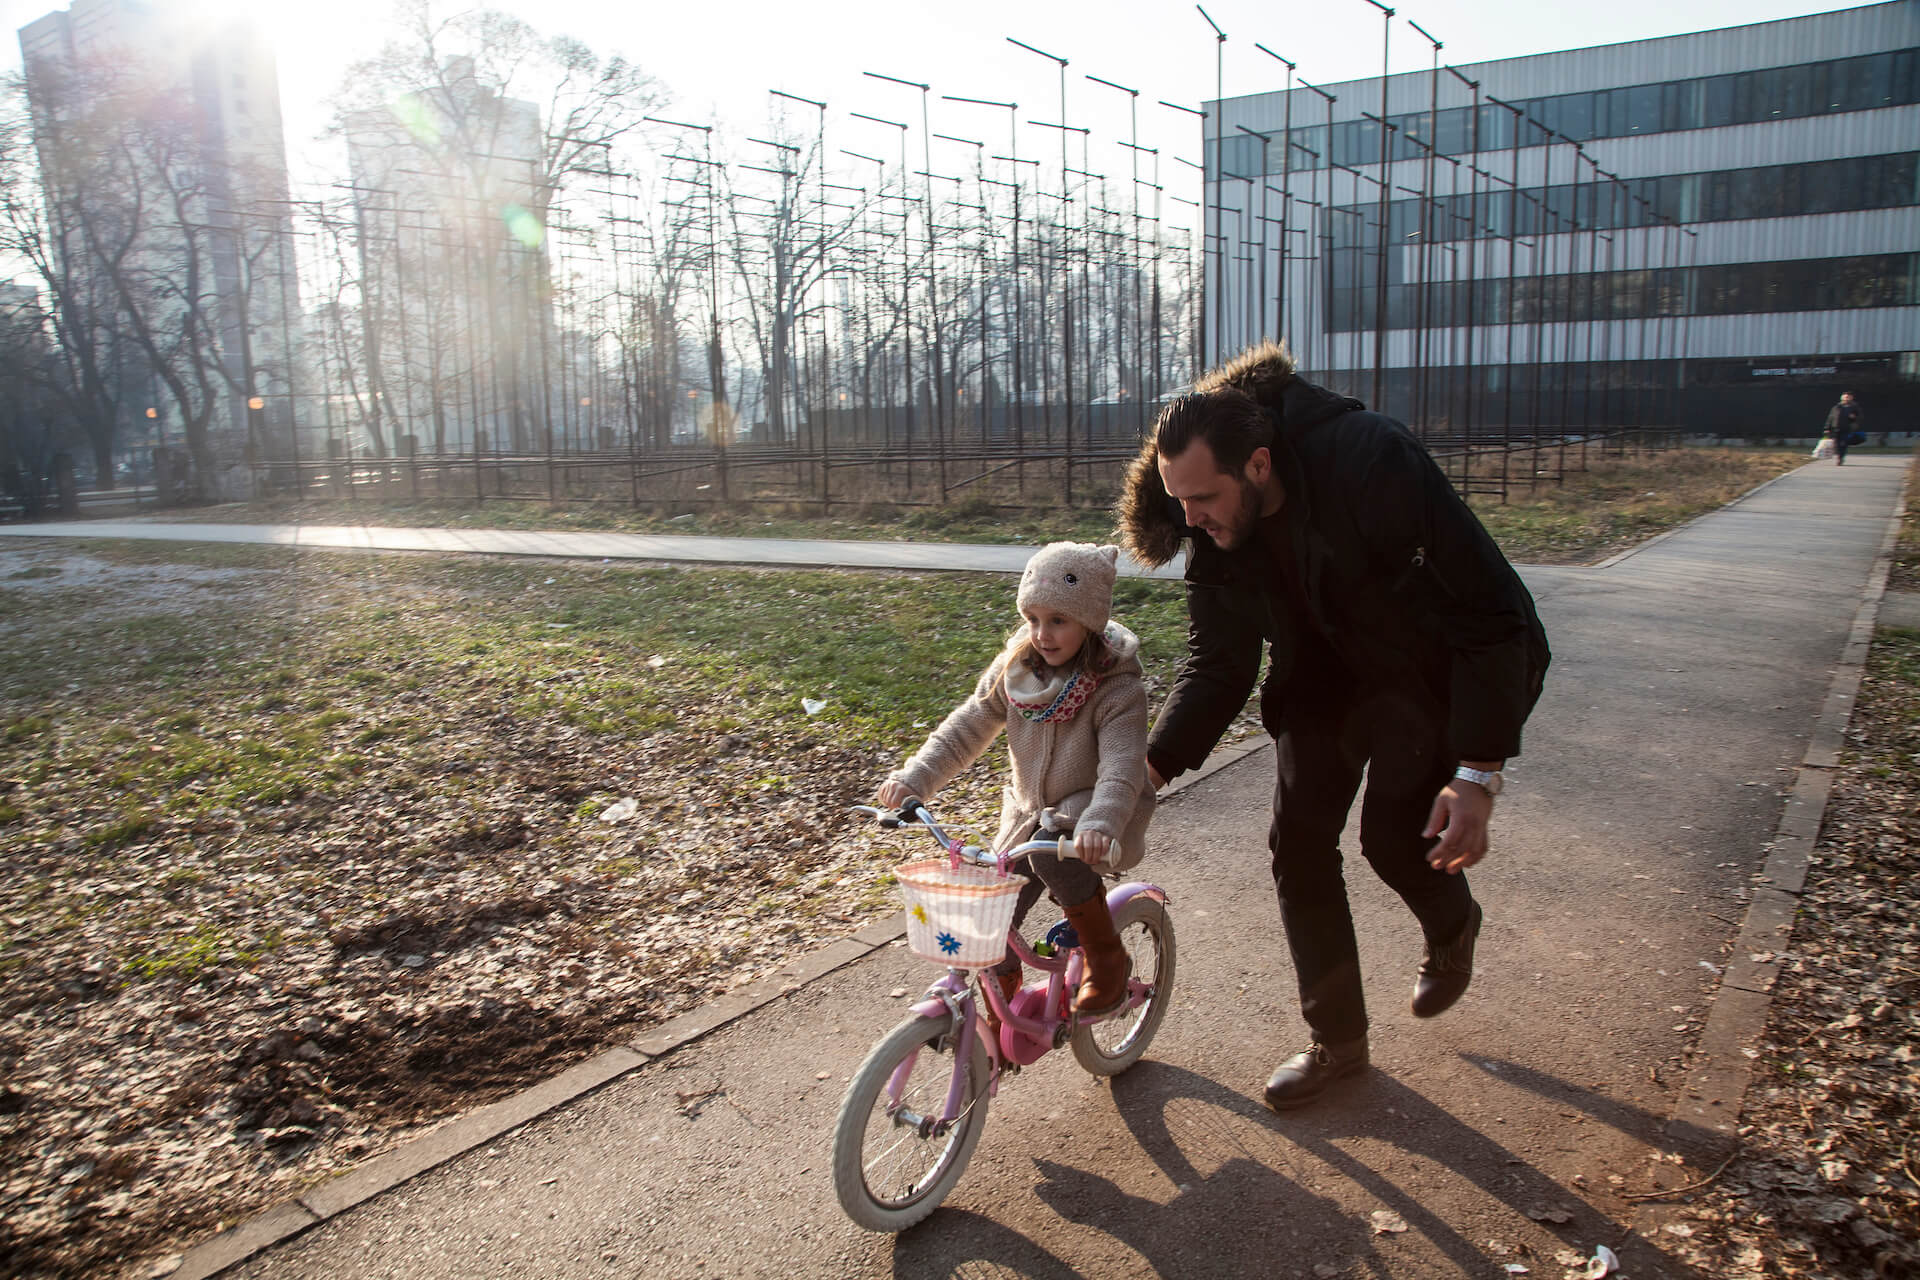 Nihad Hasanović teaches his 5 year old daughter Enea how to ride a bicycle. Nihad is a stay at home dad, whose wife works daytime office hours. He looks after the household and their daughter.  Sarajevo, Bosnia and Herzegovina. December 2016. Photo: UN Women/Rena Effendi